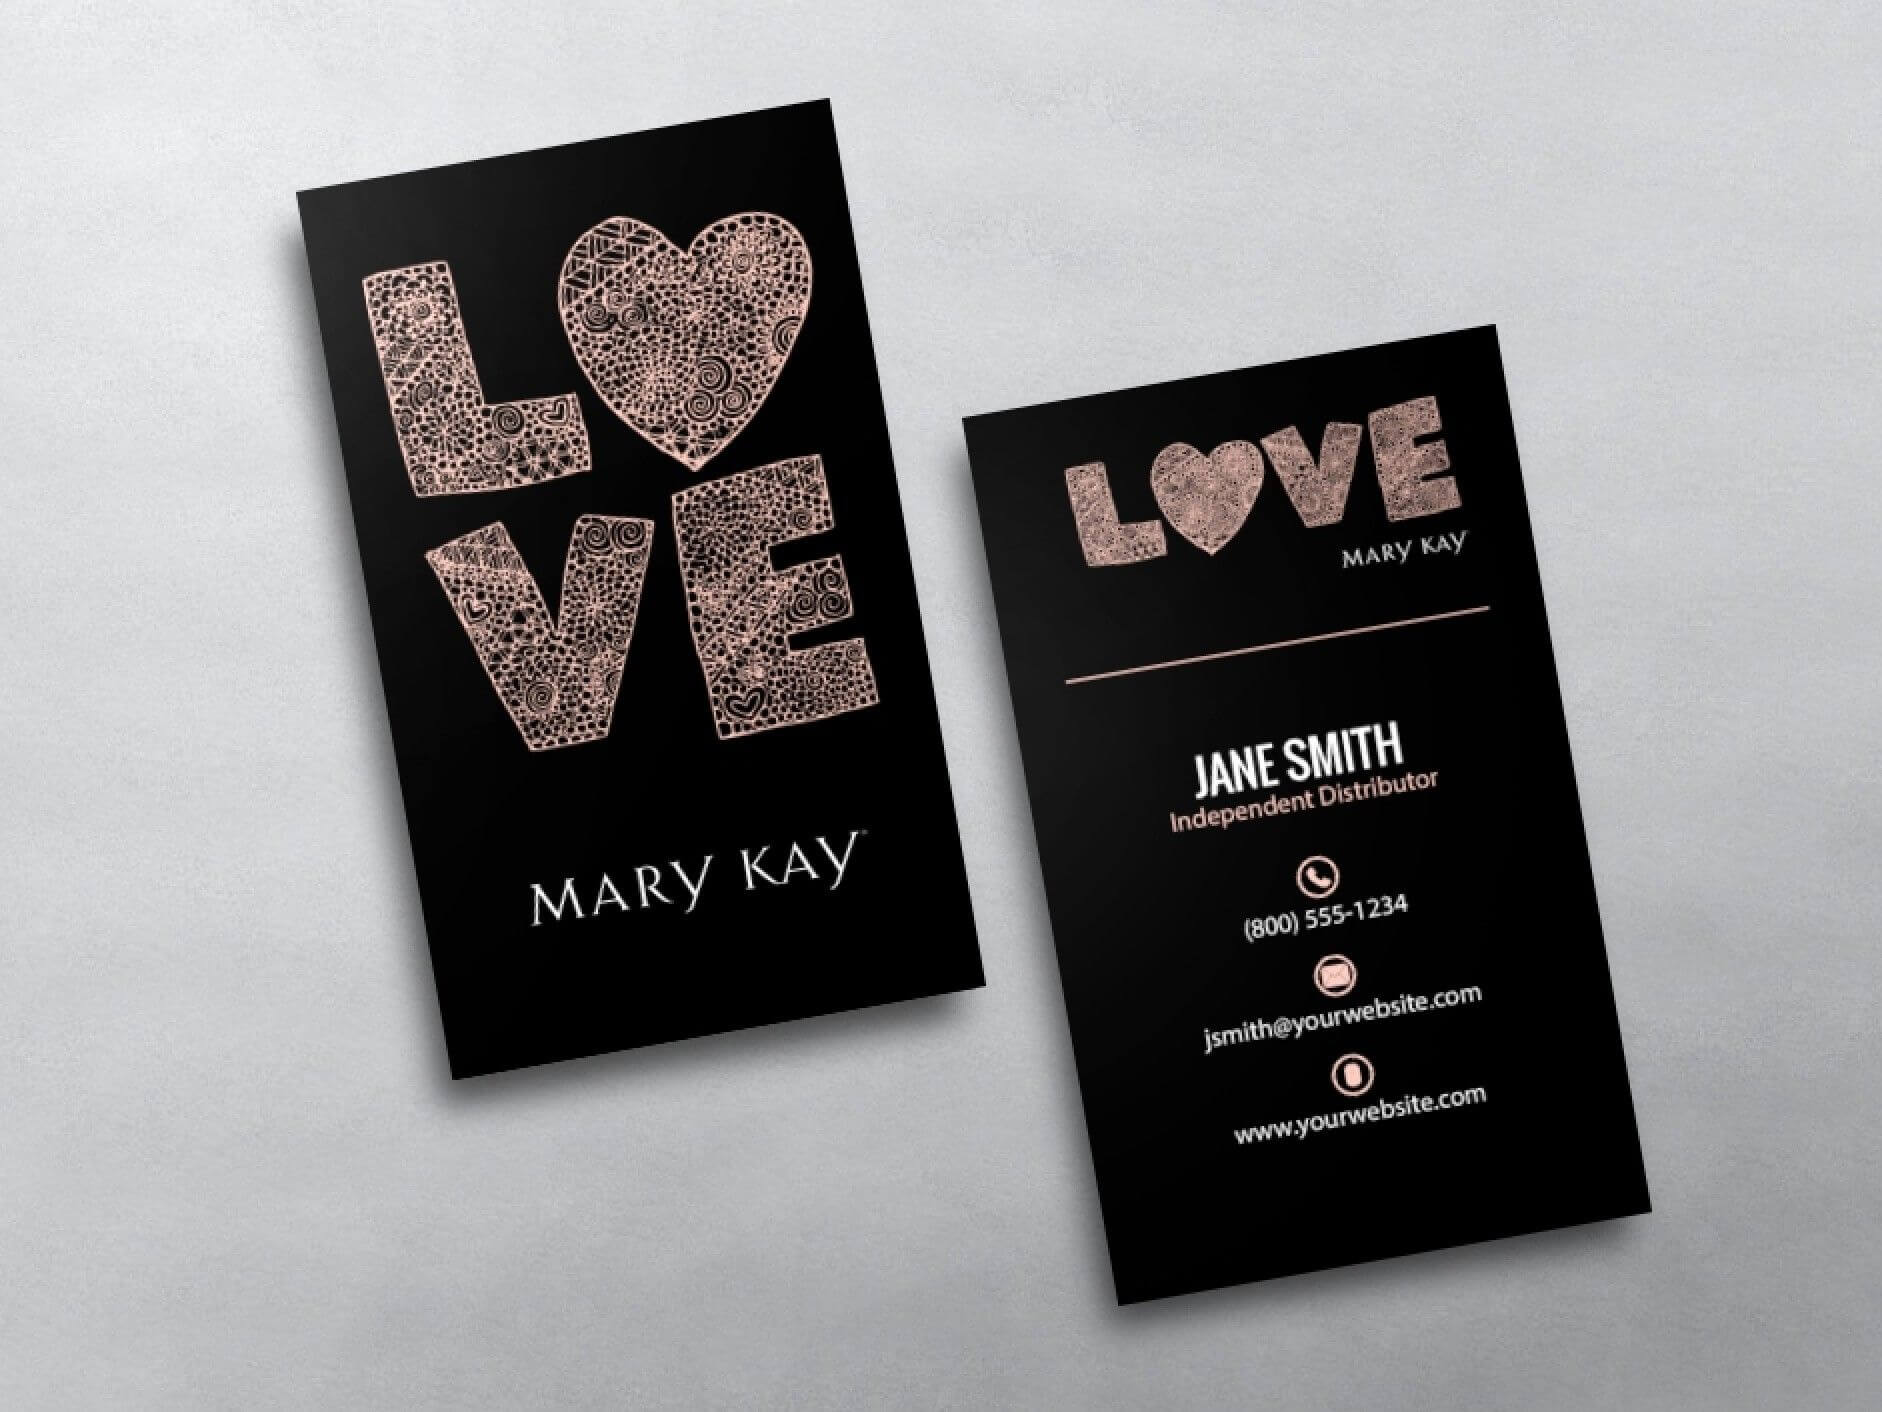 Mary Kay Business Cards In 2019 | Mary Kay, Business Cards With Regard To Mary Kay Business Cards Templates Free